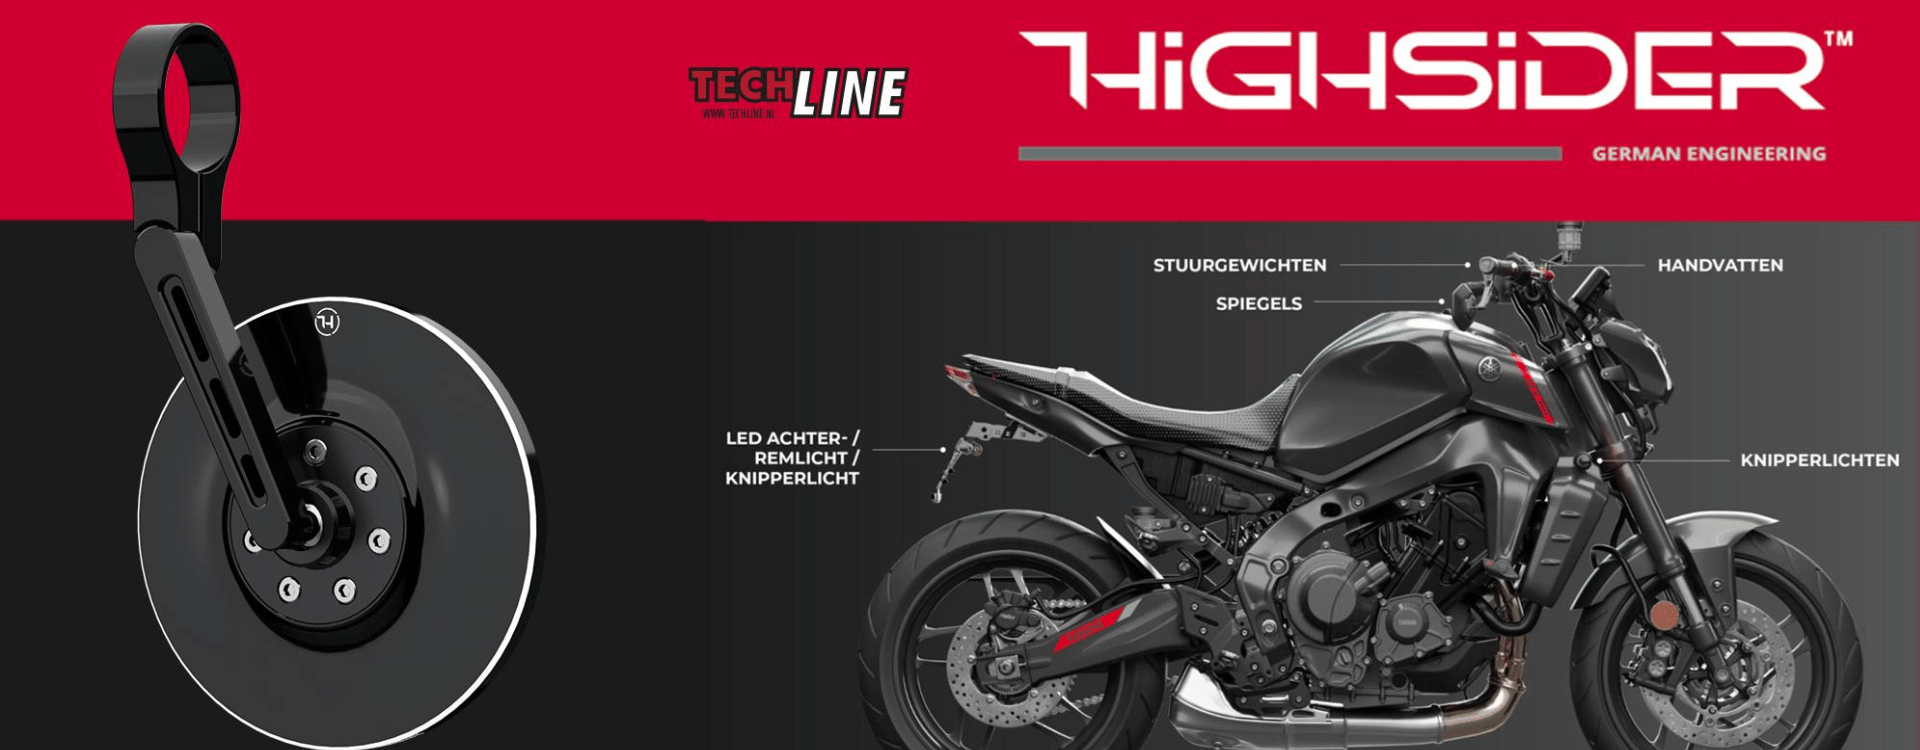 Highsider. German quality motorcycle accessories